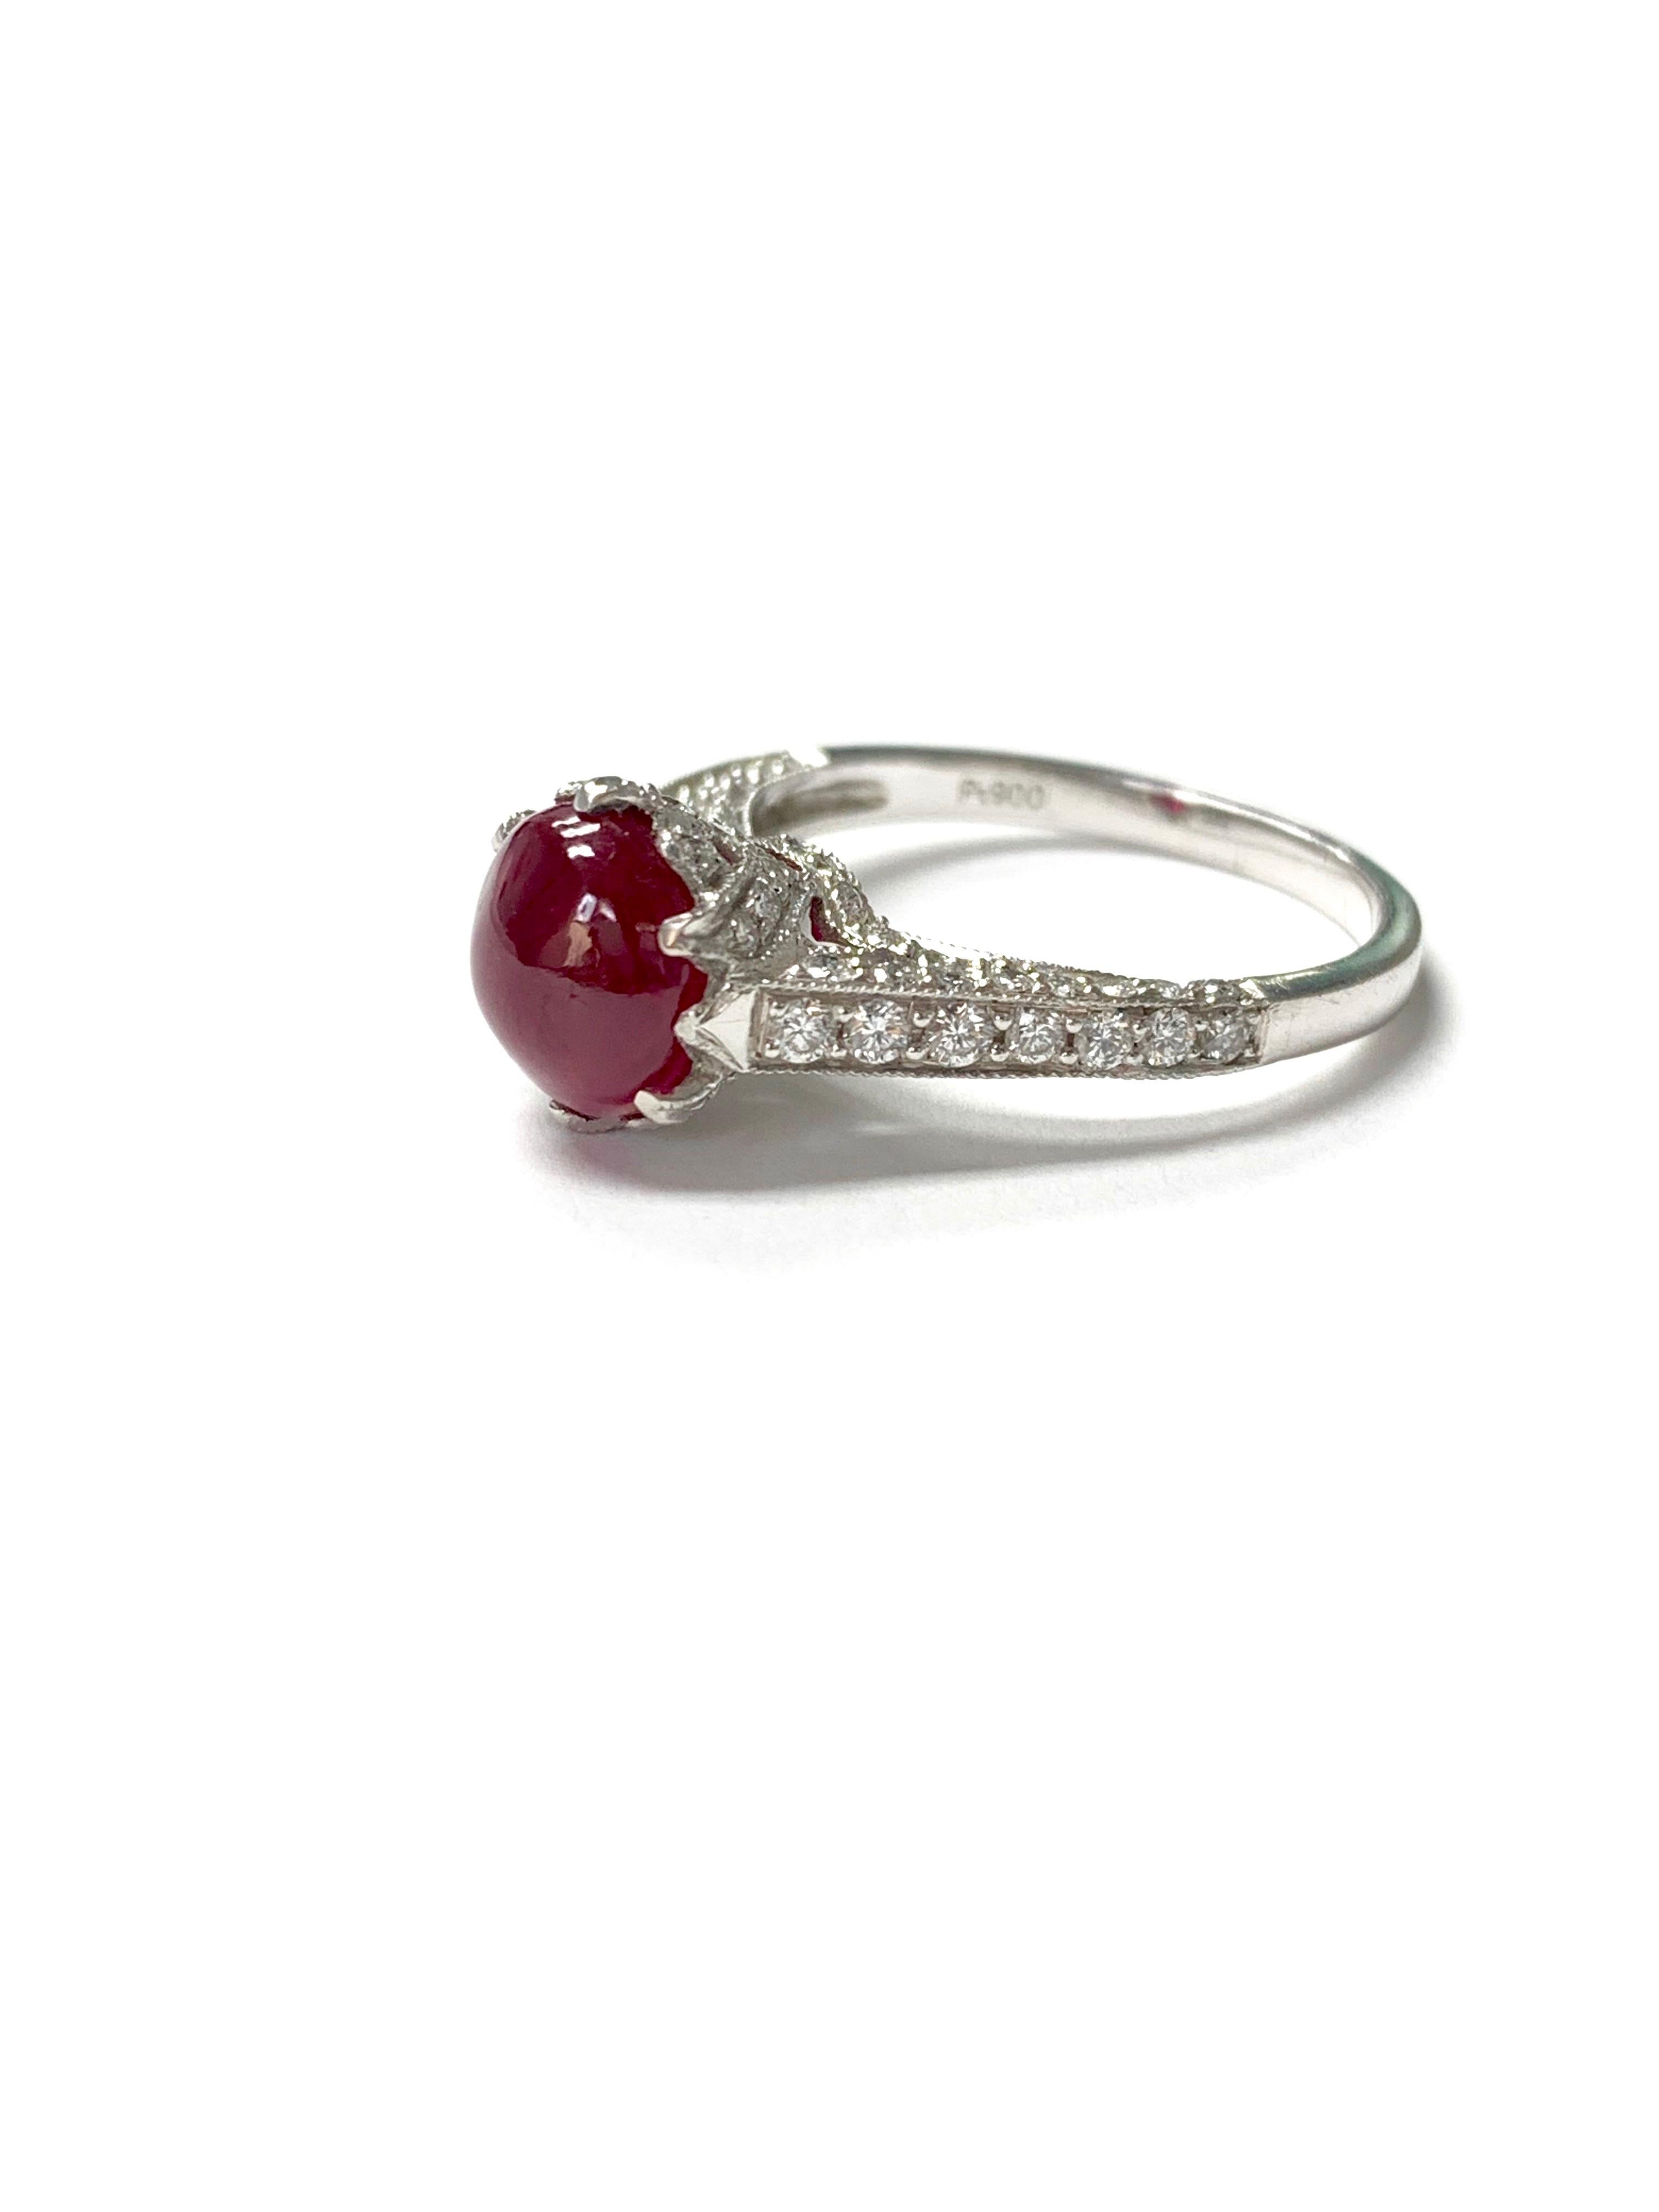 Burma No Heat Ruby Cabochon and Diamond Engagement Ring C. Dunaigre Certified.  For Sale 1